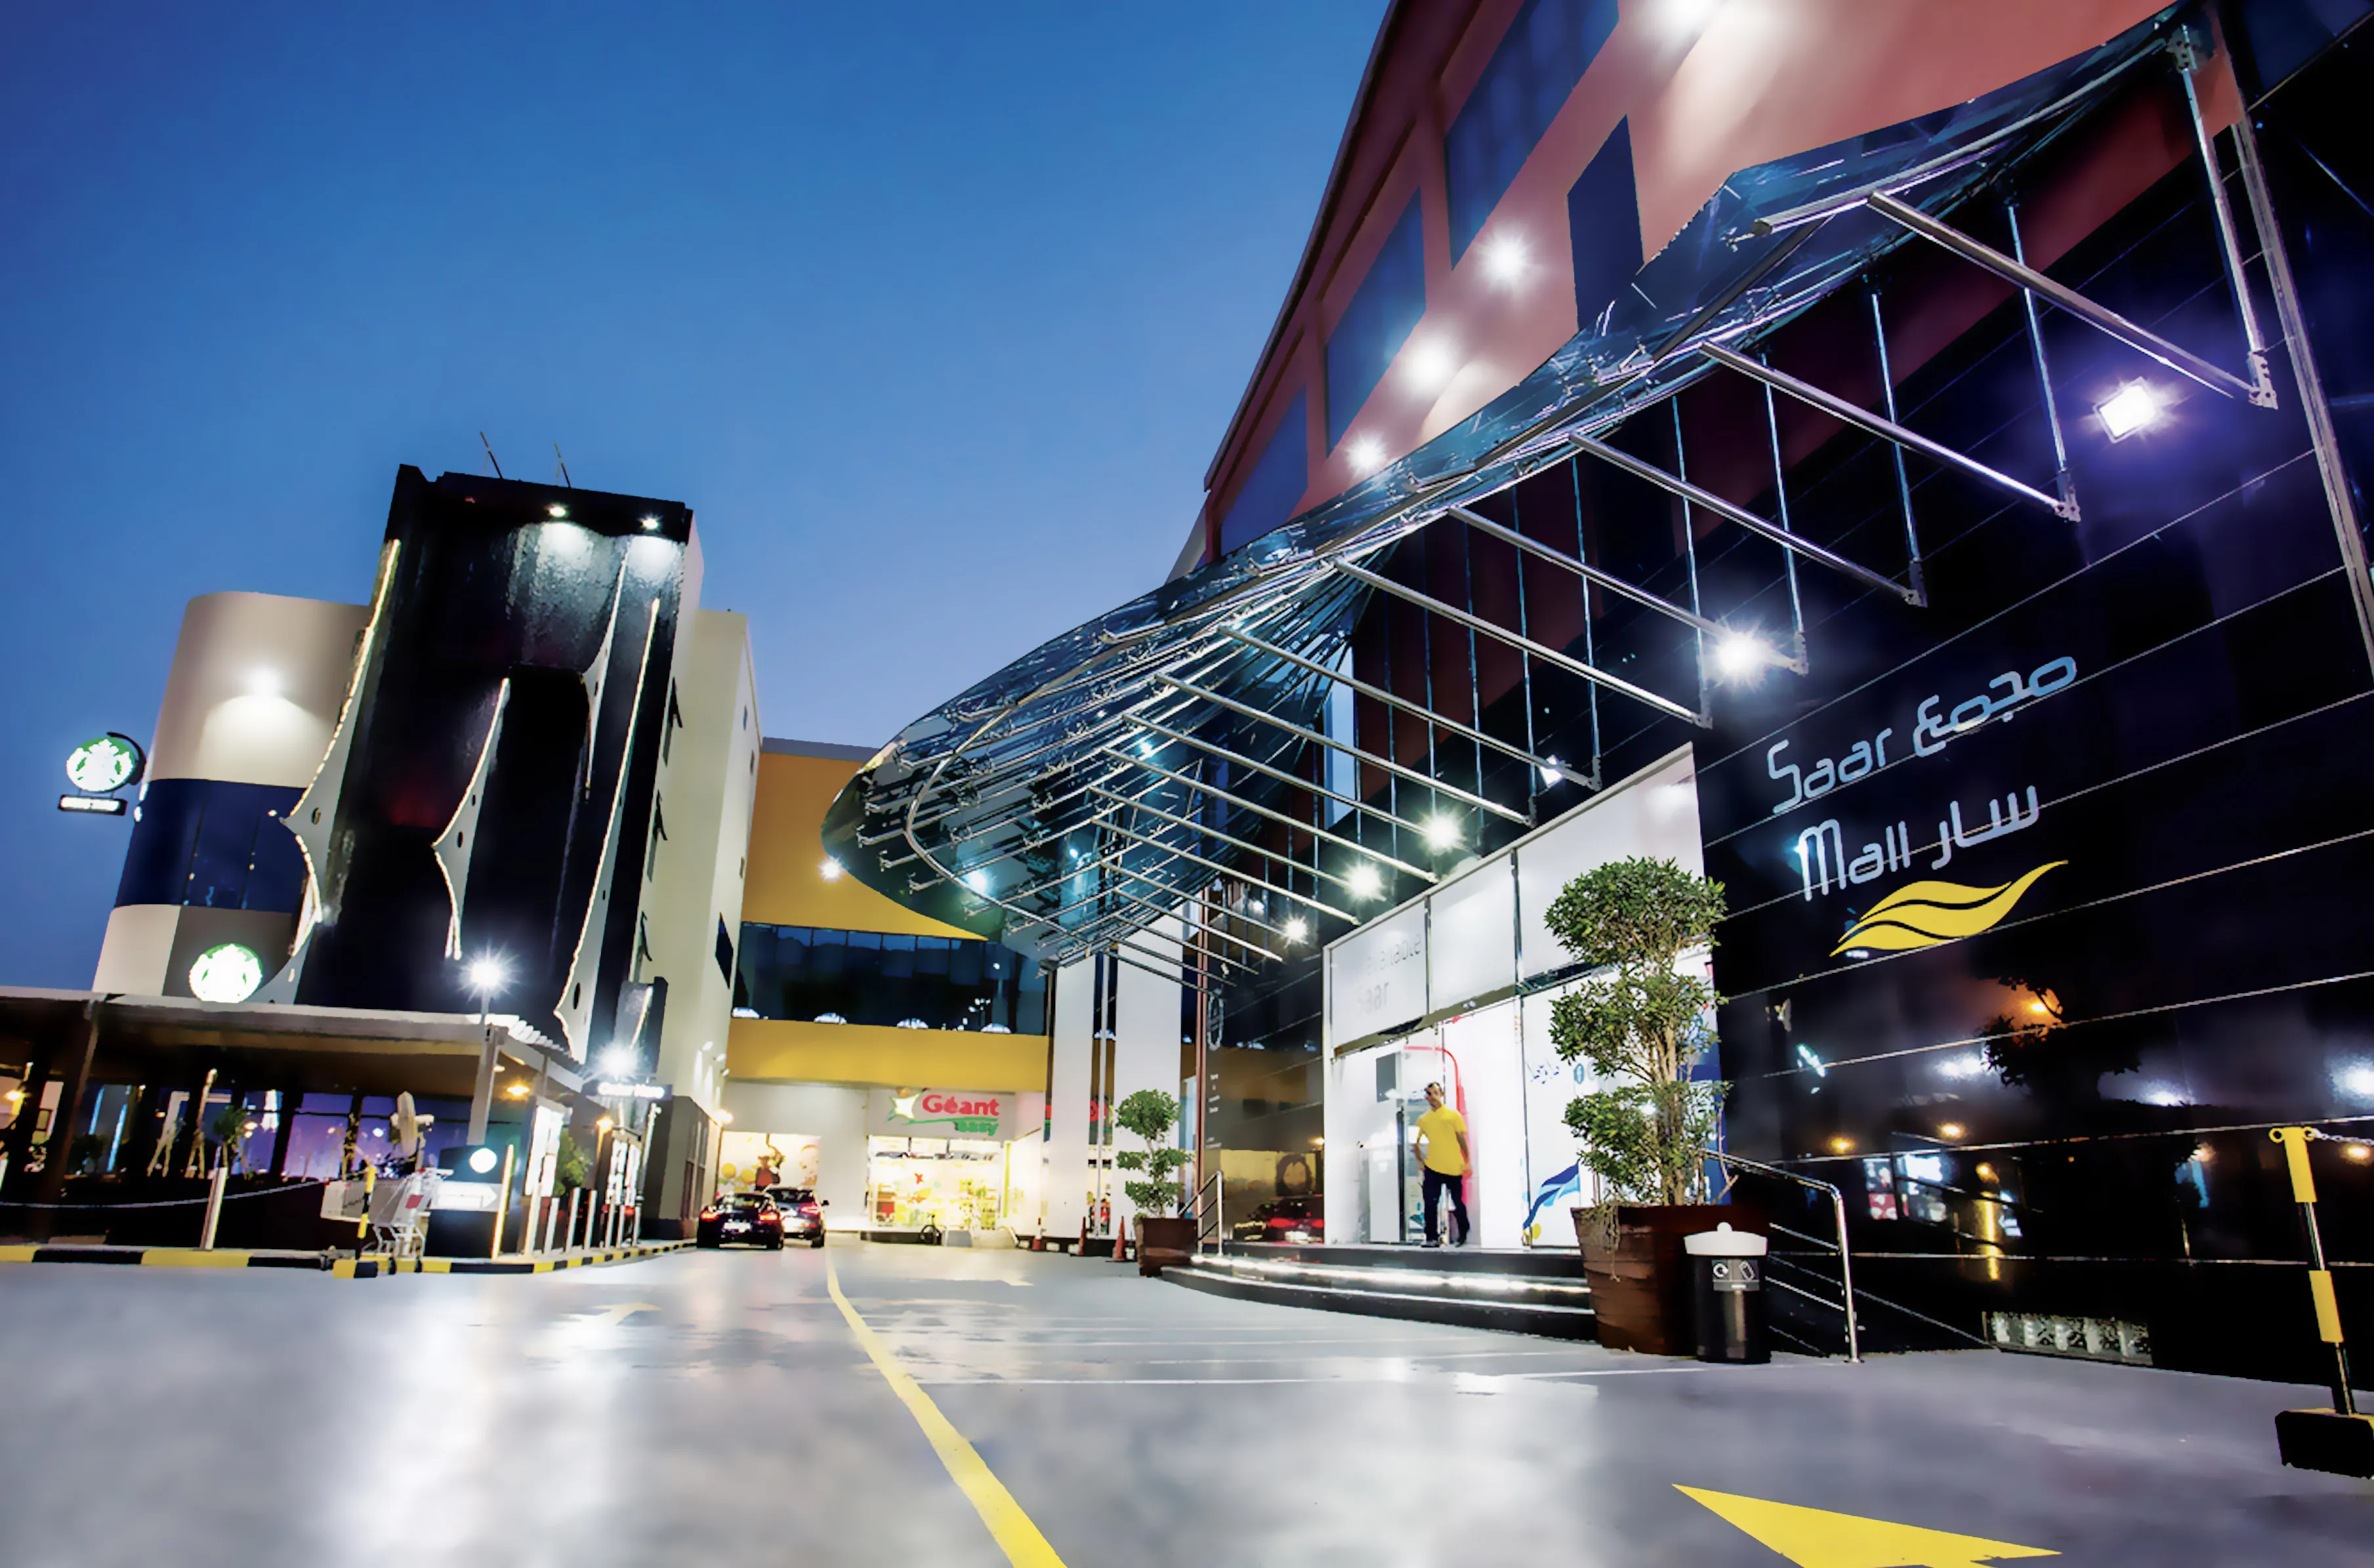 Saar Mall in Bahrain, middle_east | Handbags,Shoes,Accessories,Clothes,Sportswear,Jewelry - Country Helper